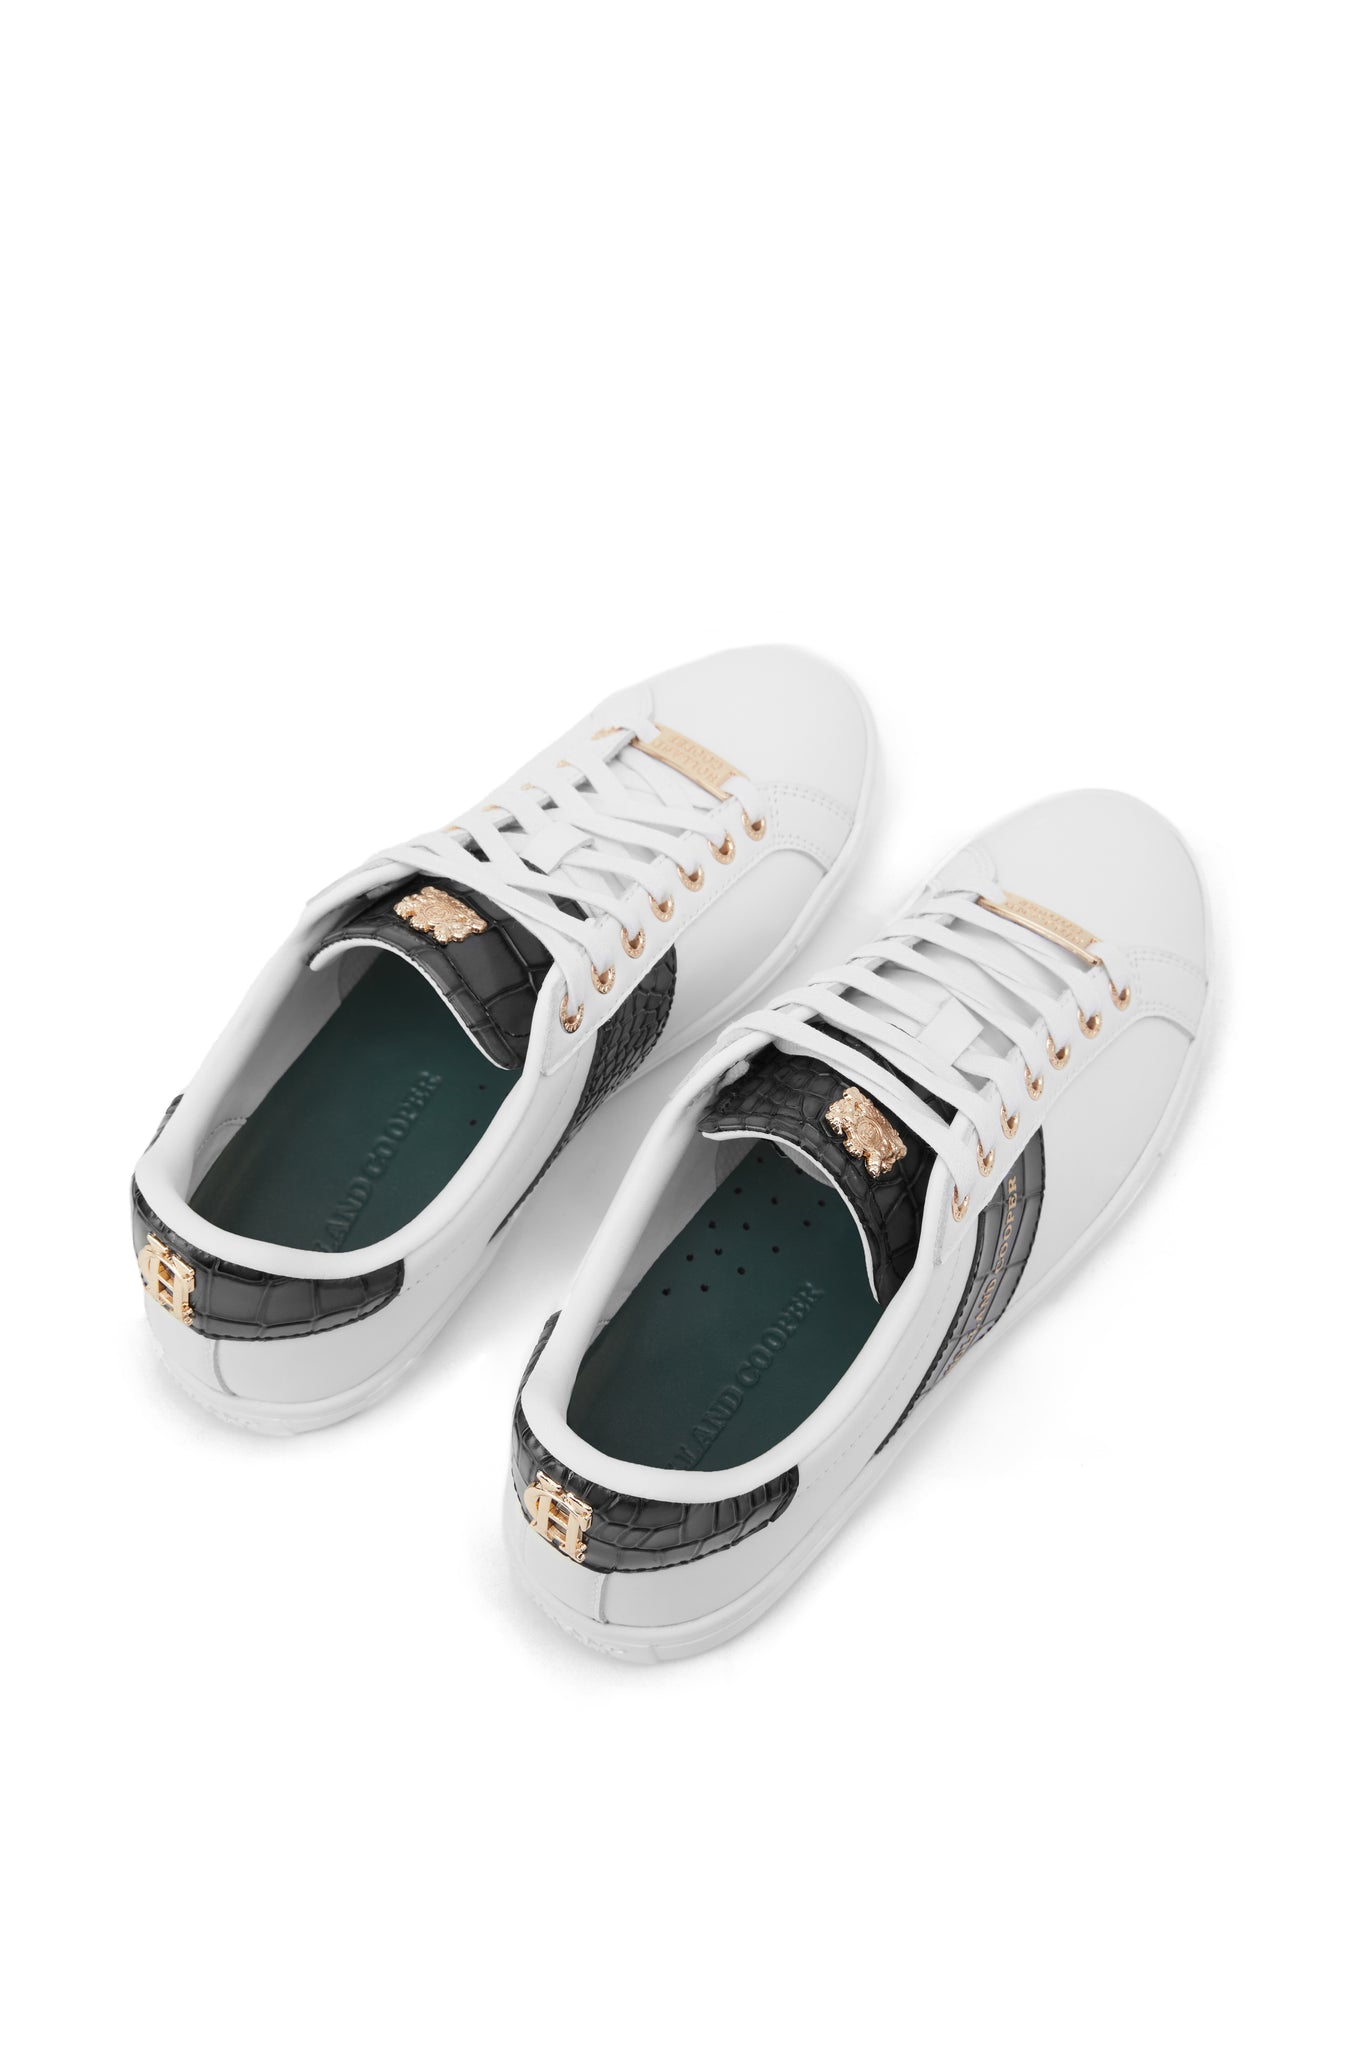 Birds eye view of white leather trainers with white laces detailed with a diagonal stripe of black croc embossed leather with gold foil branding and a black croc embossed leather tongue and heel with gold hardware 